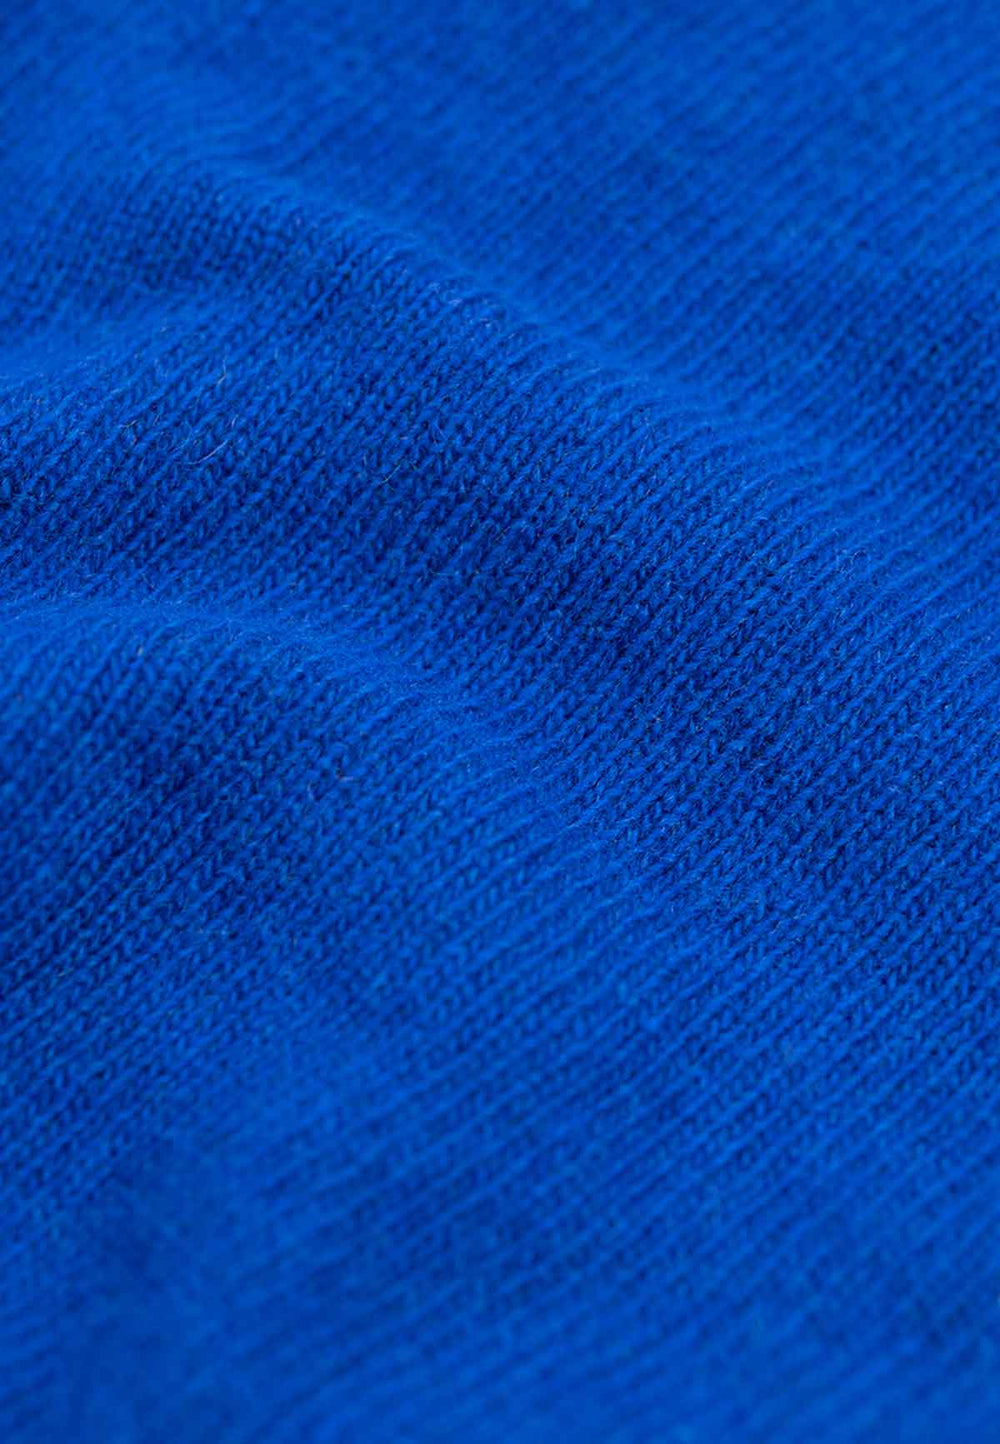 Close up of the knit fabric of a knit hood in cobalt blue.